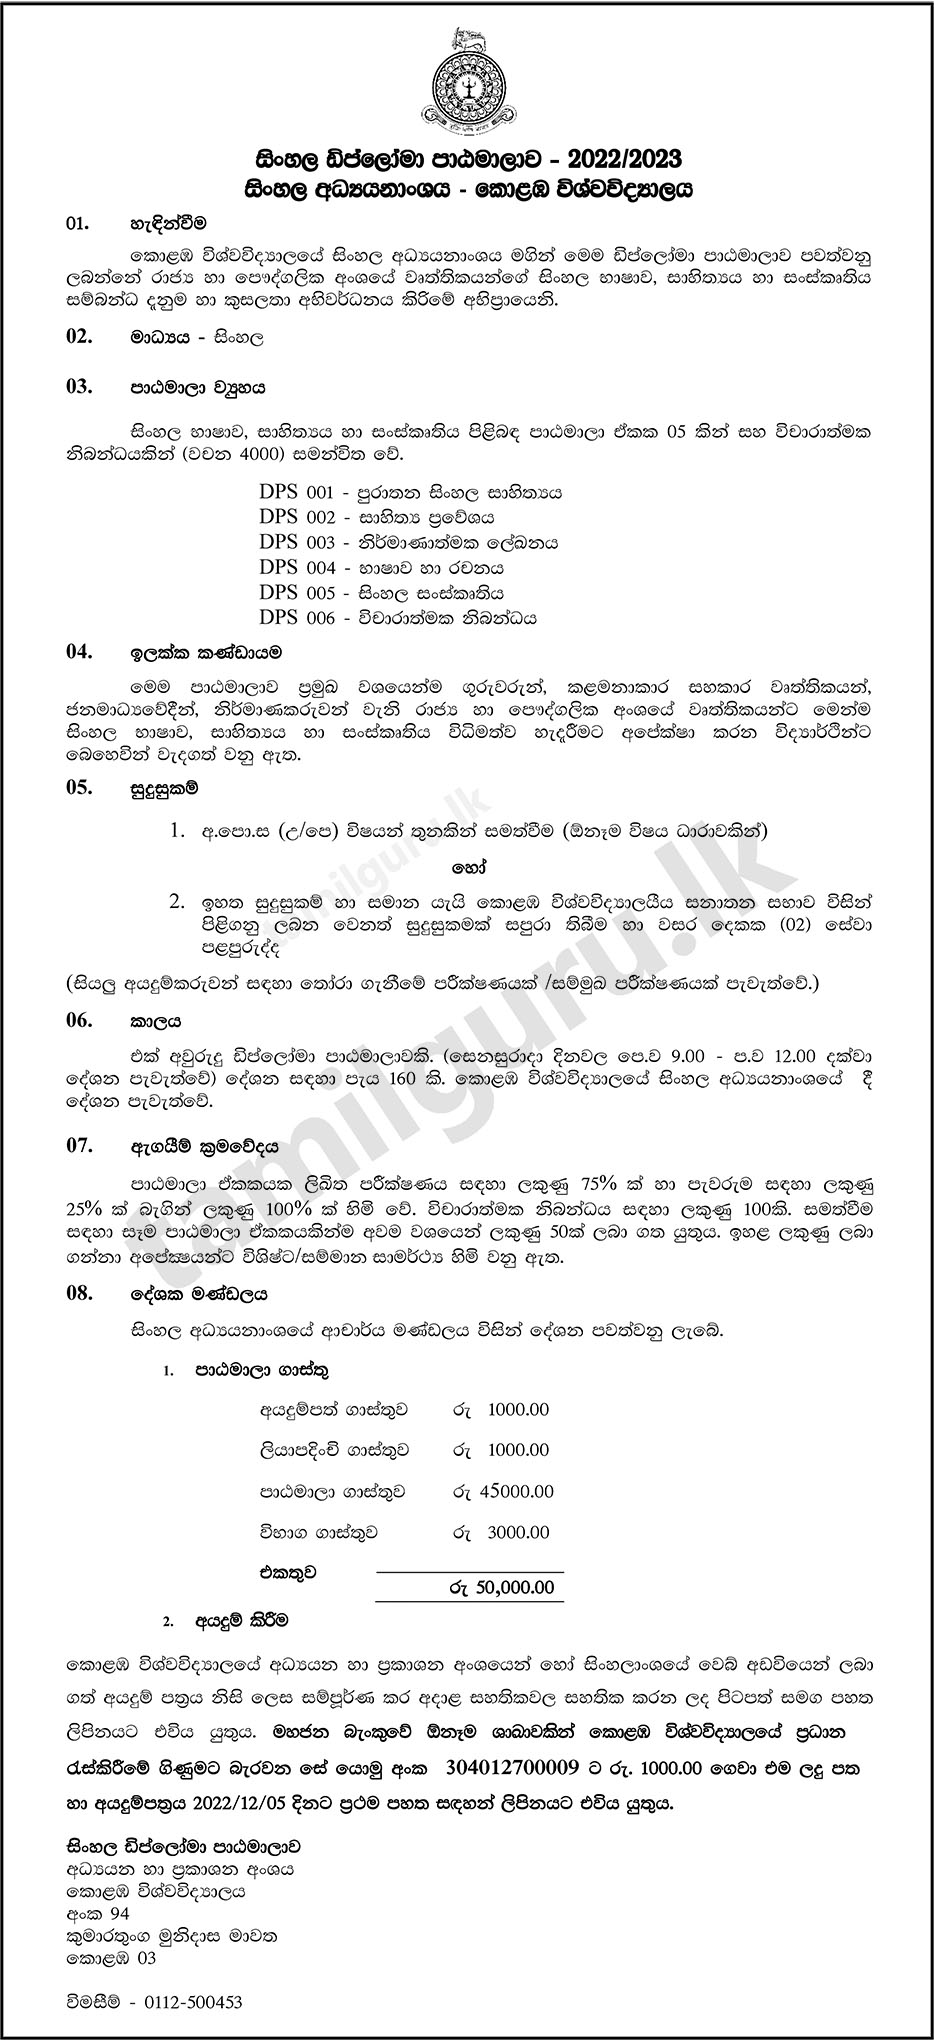 Calling Applications for Diploma in Sinhala 2022/2023 - University of Colombo